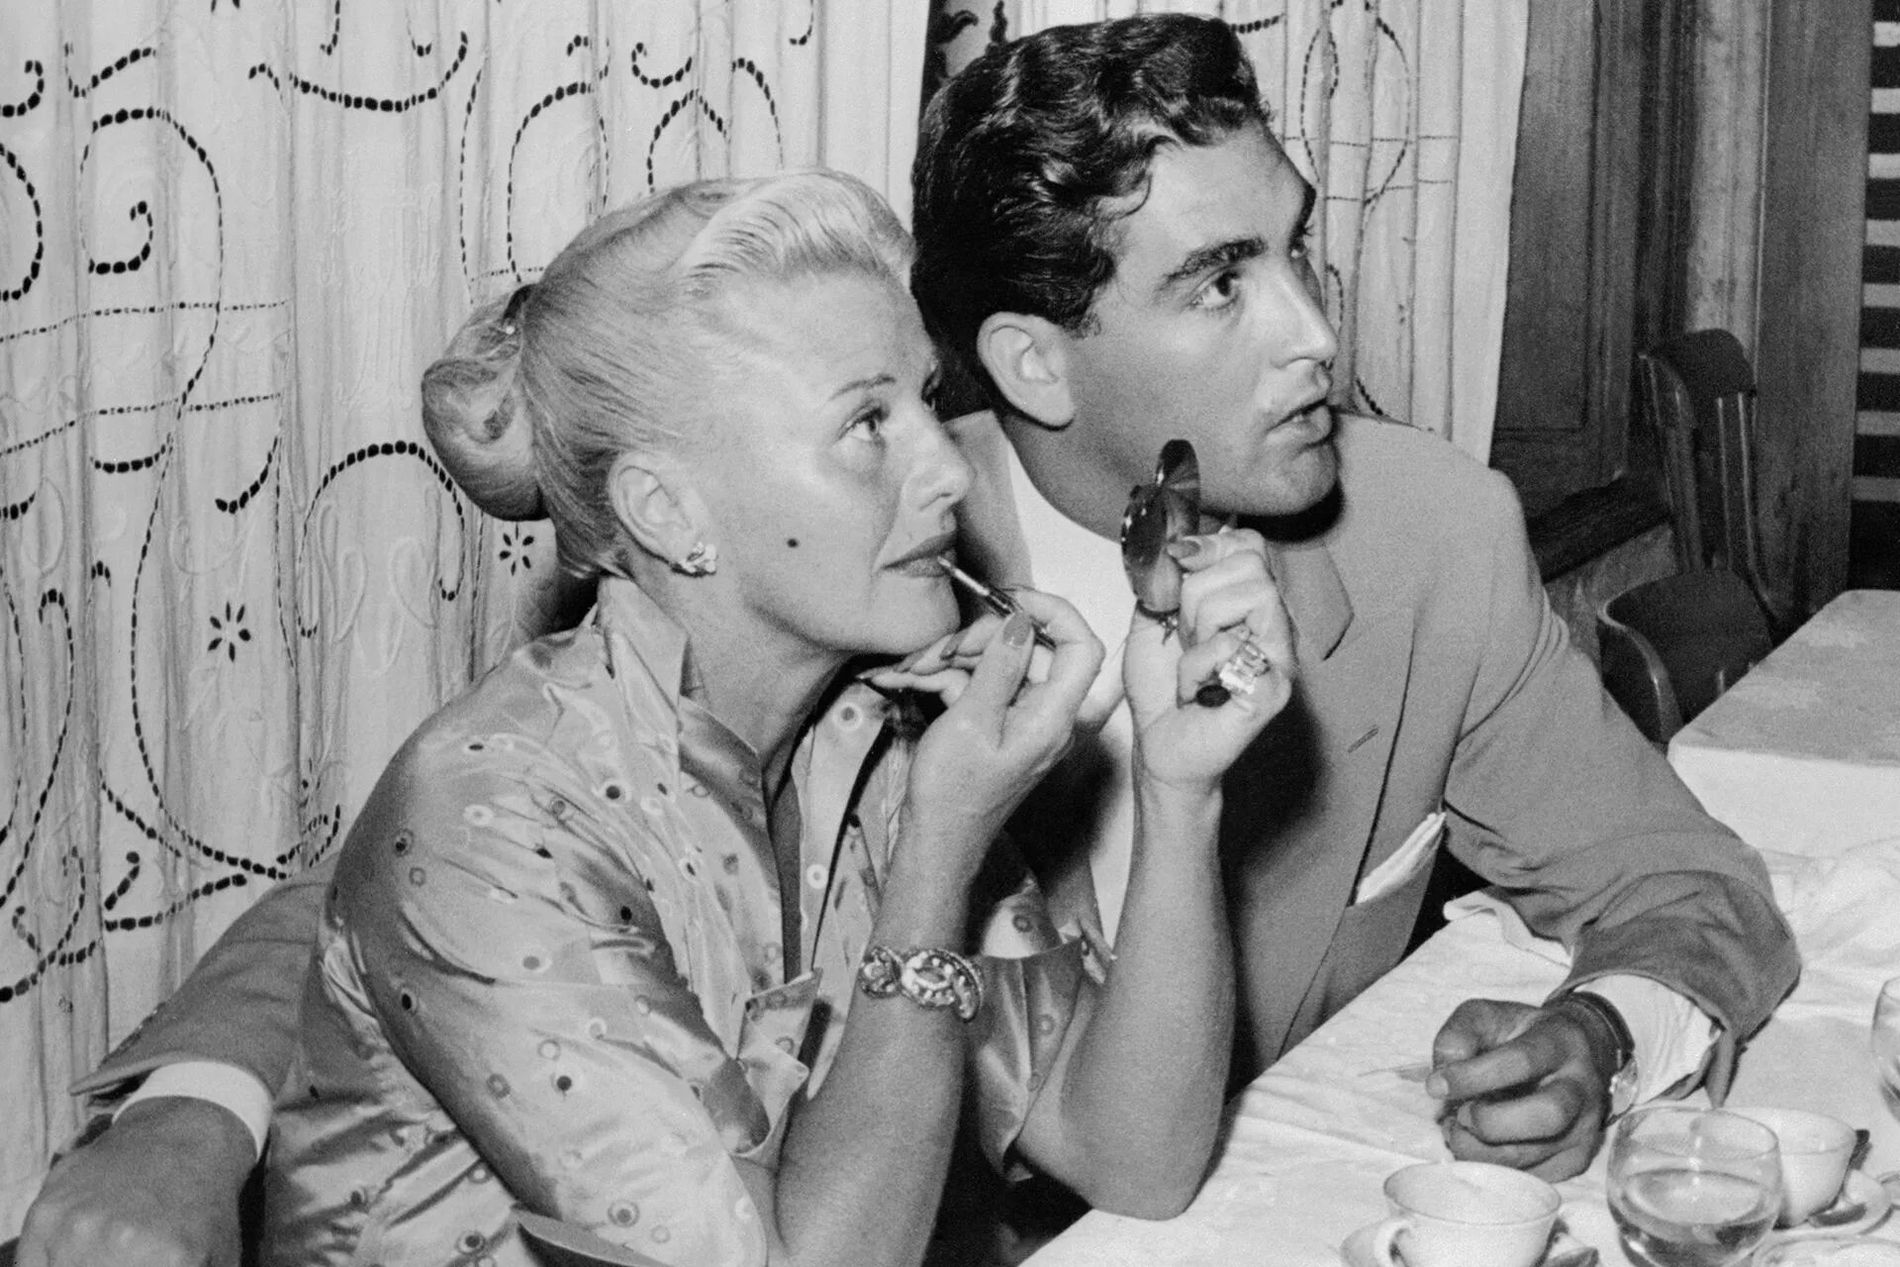 Ginger Rogers and Jacques Bergerac in 1952 at Venice Film Festival